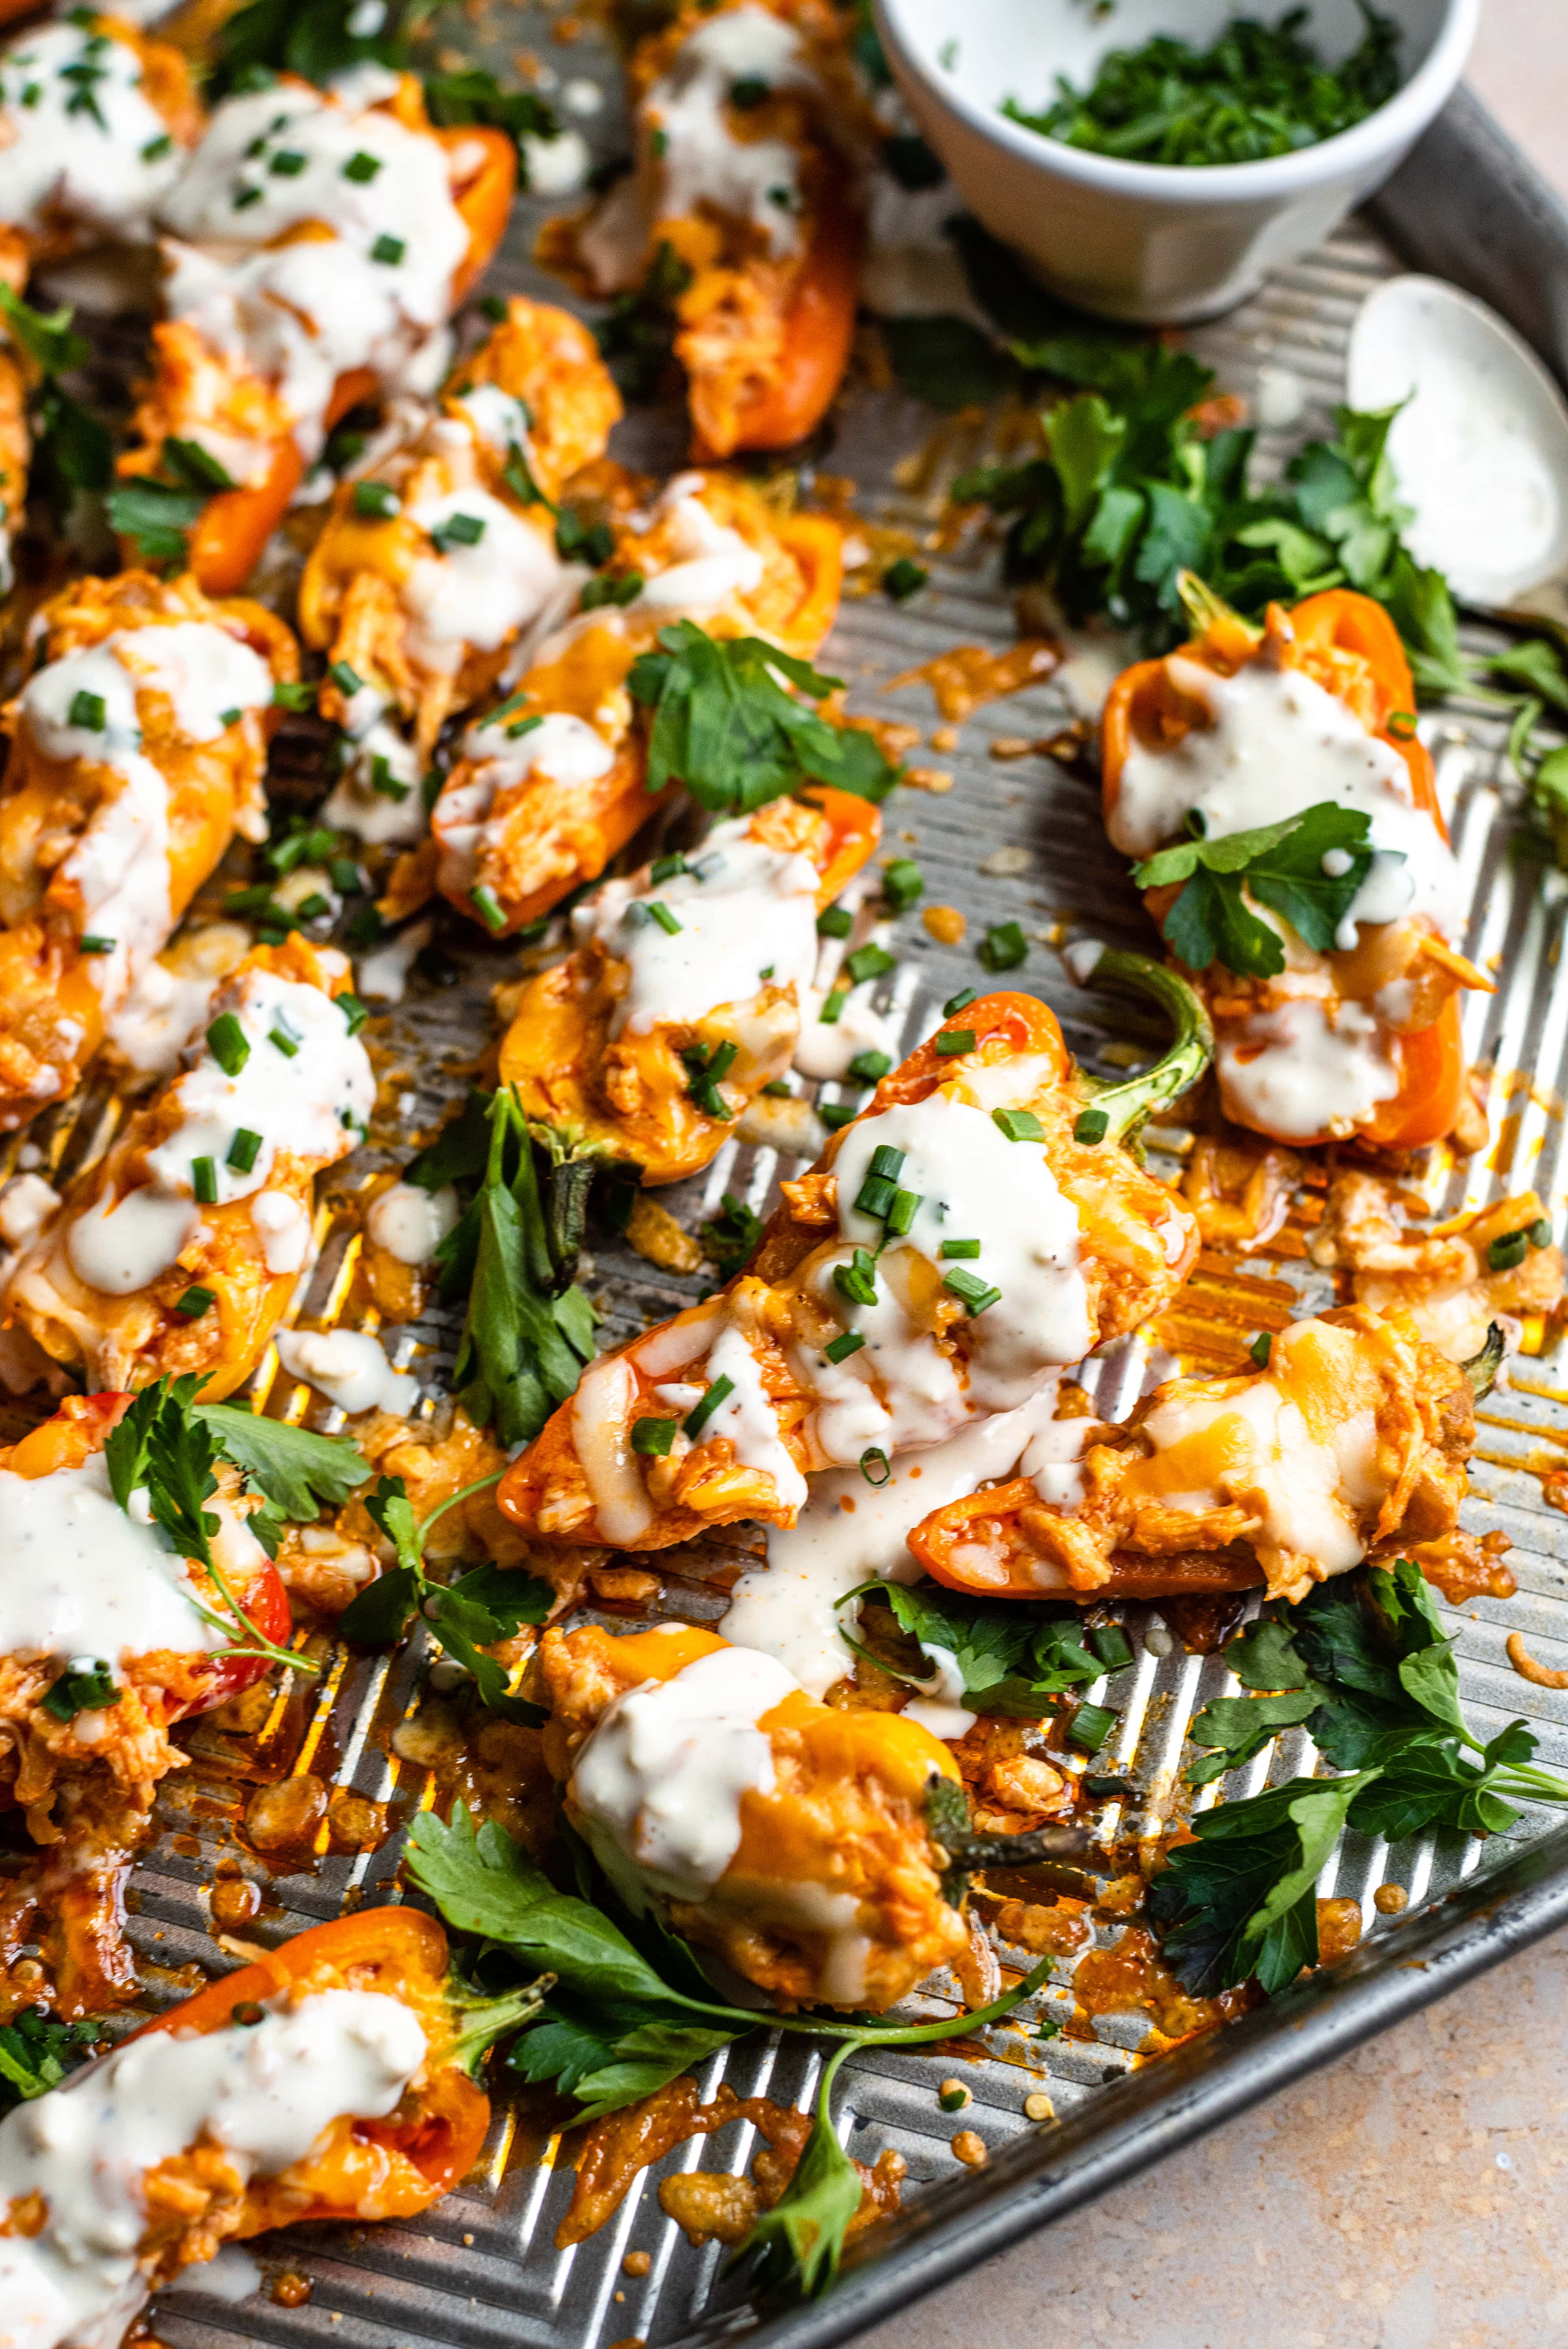 Mini sweet peppers filled with buffalo chicken and drizzled with blue cheese.